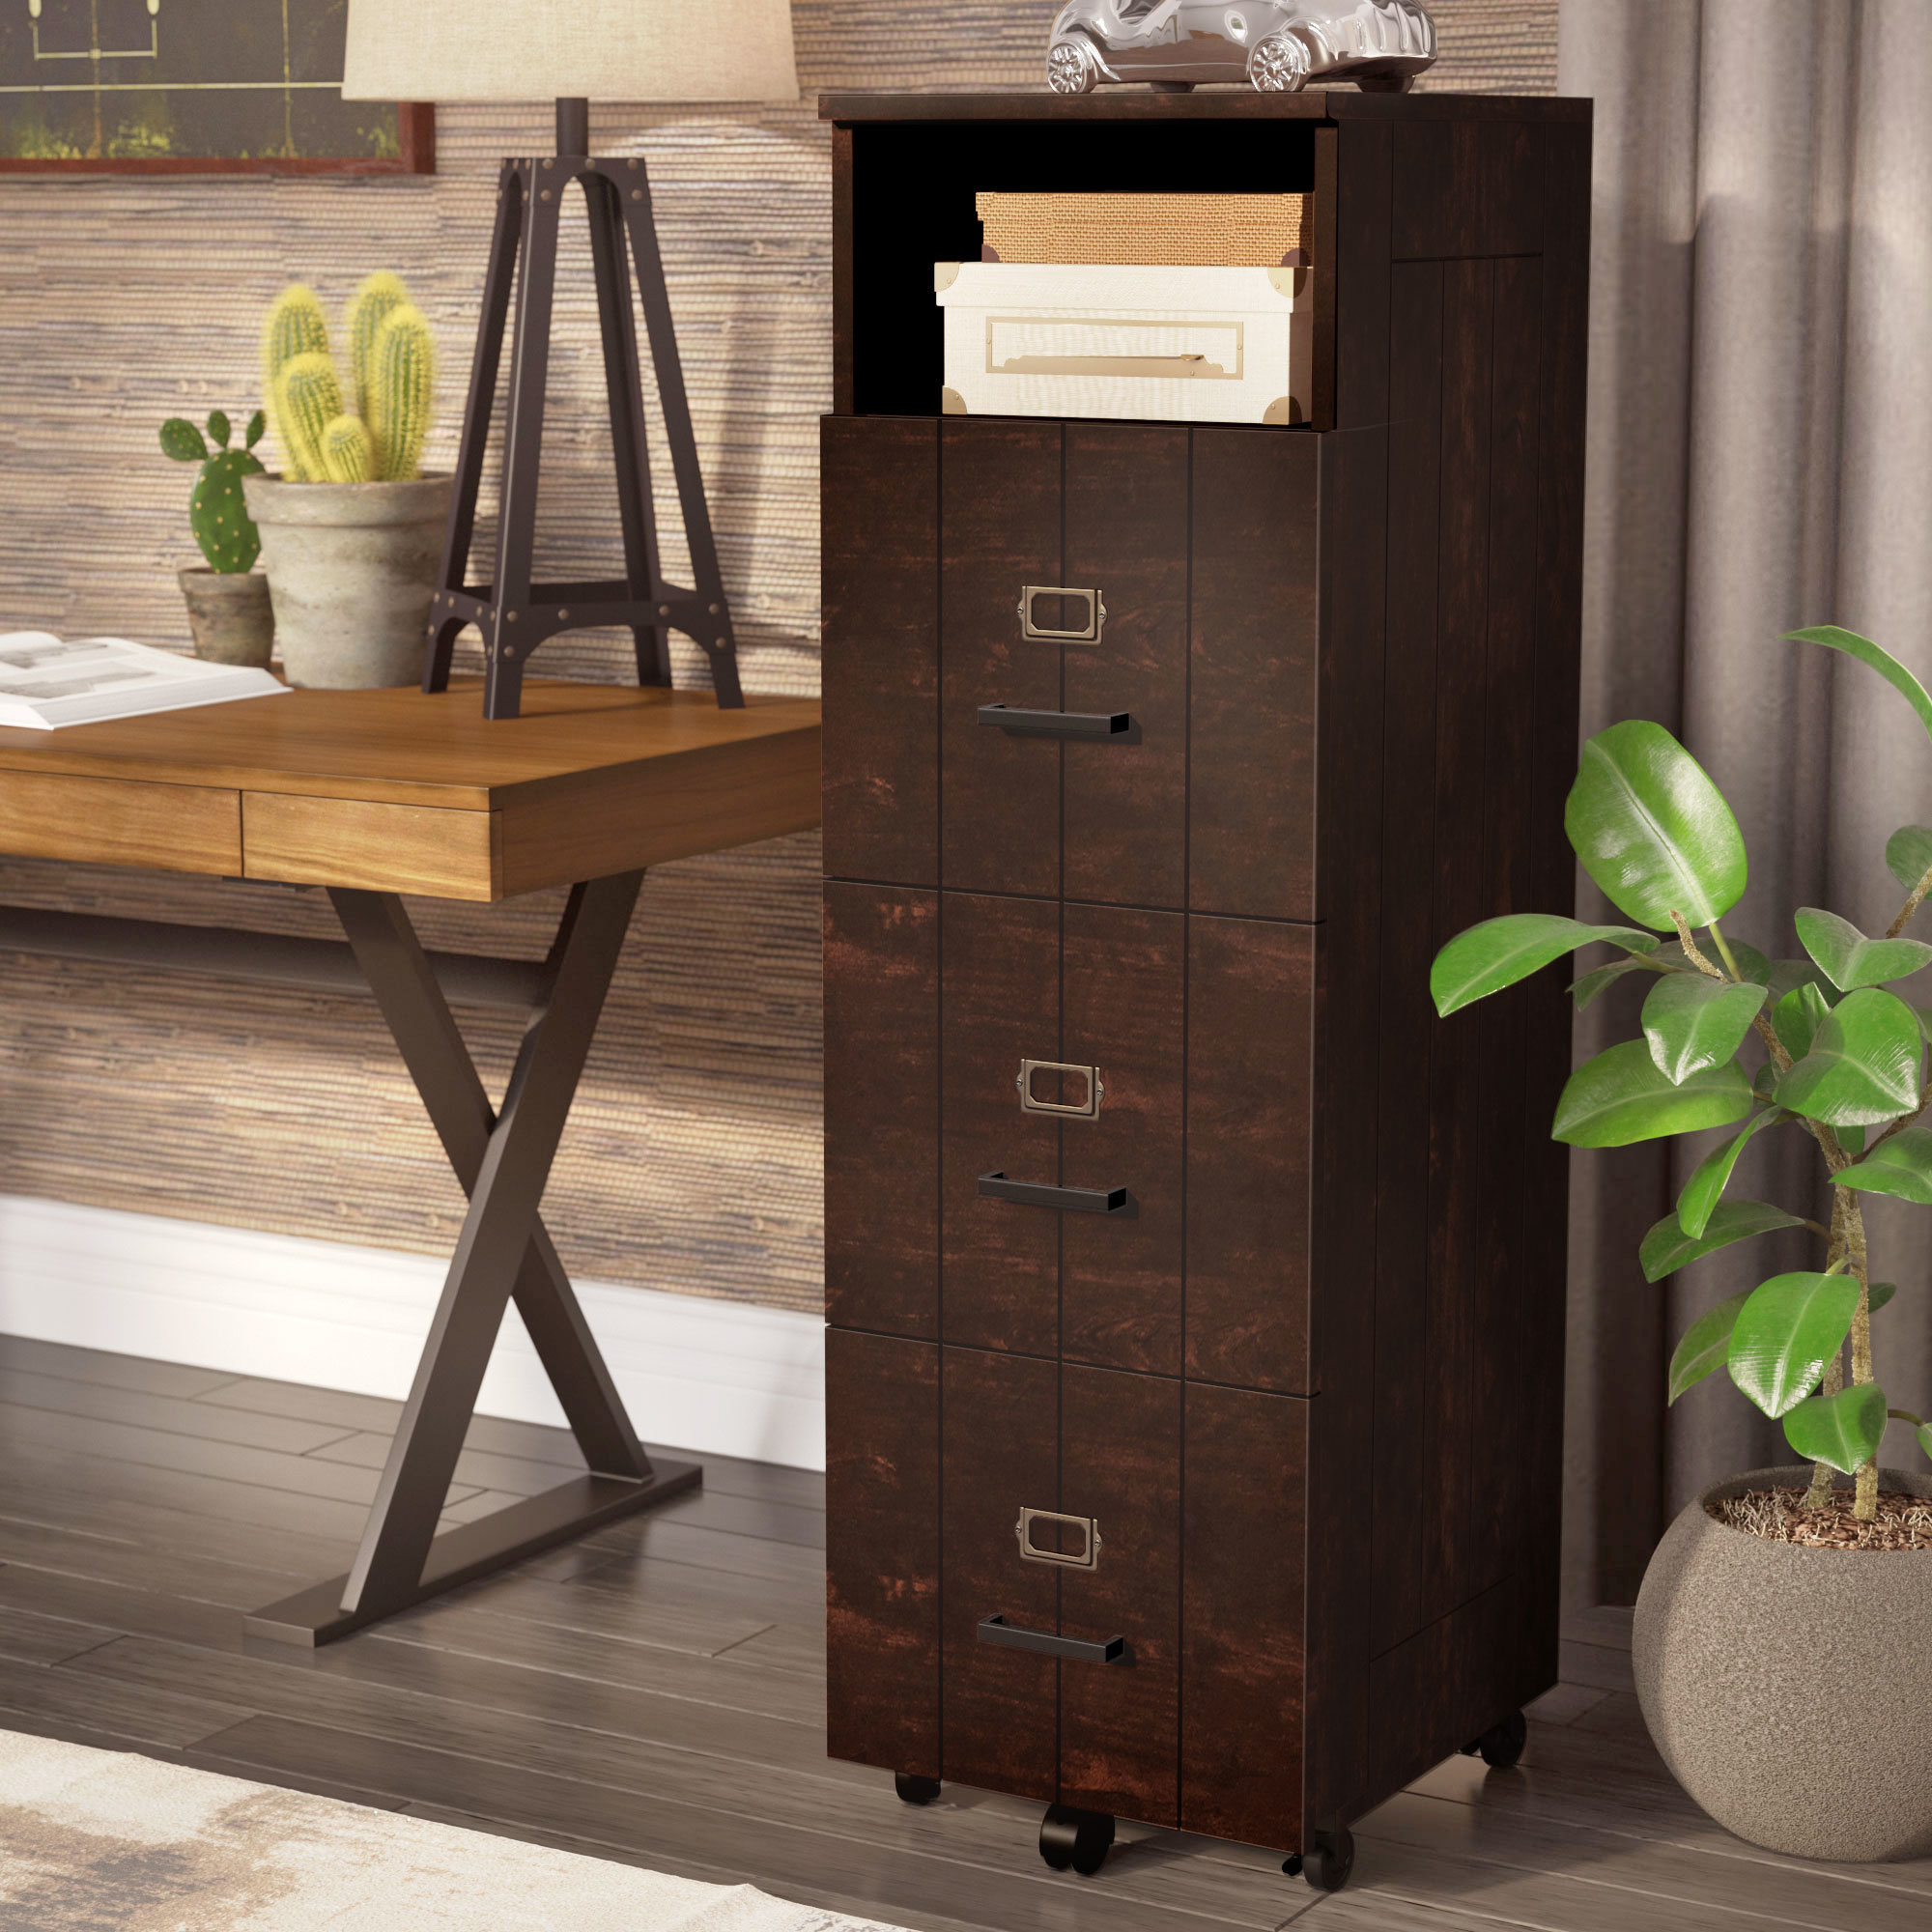 3 Drawer Wood File Cabinet With Wheels • Cabinet Ideas